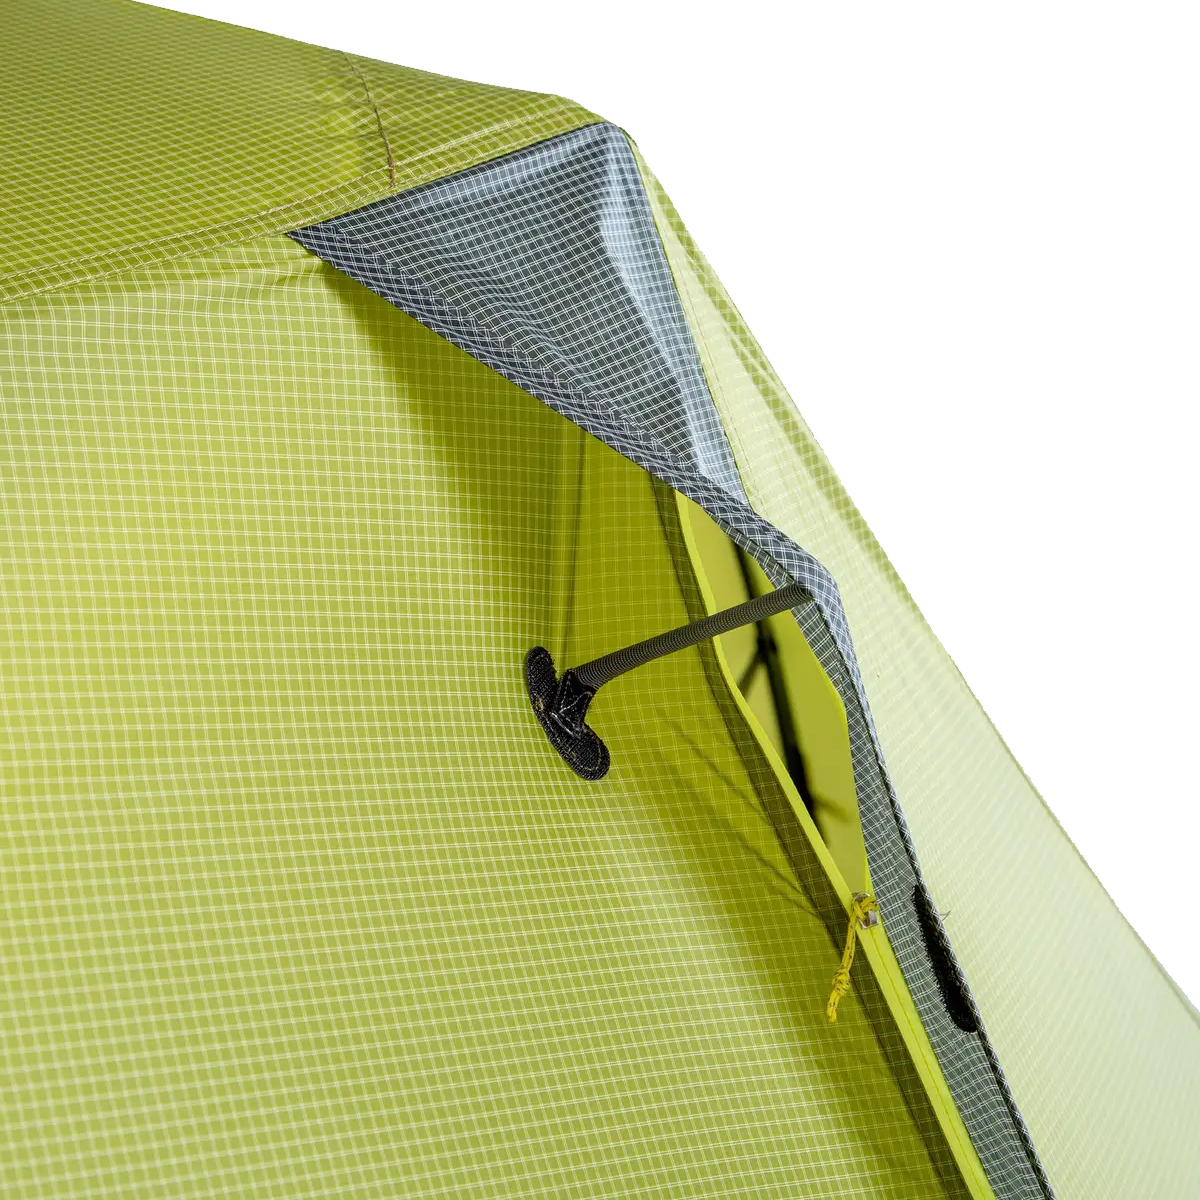 Dragonfly OSMO Ultralight 3 Person Tent alternate view